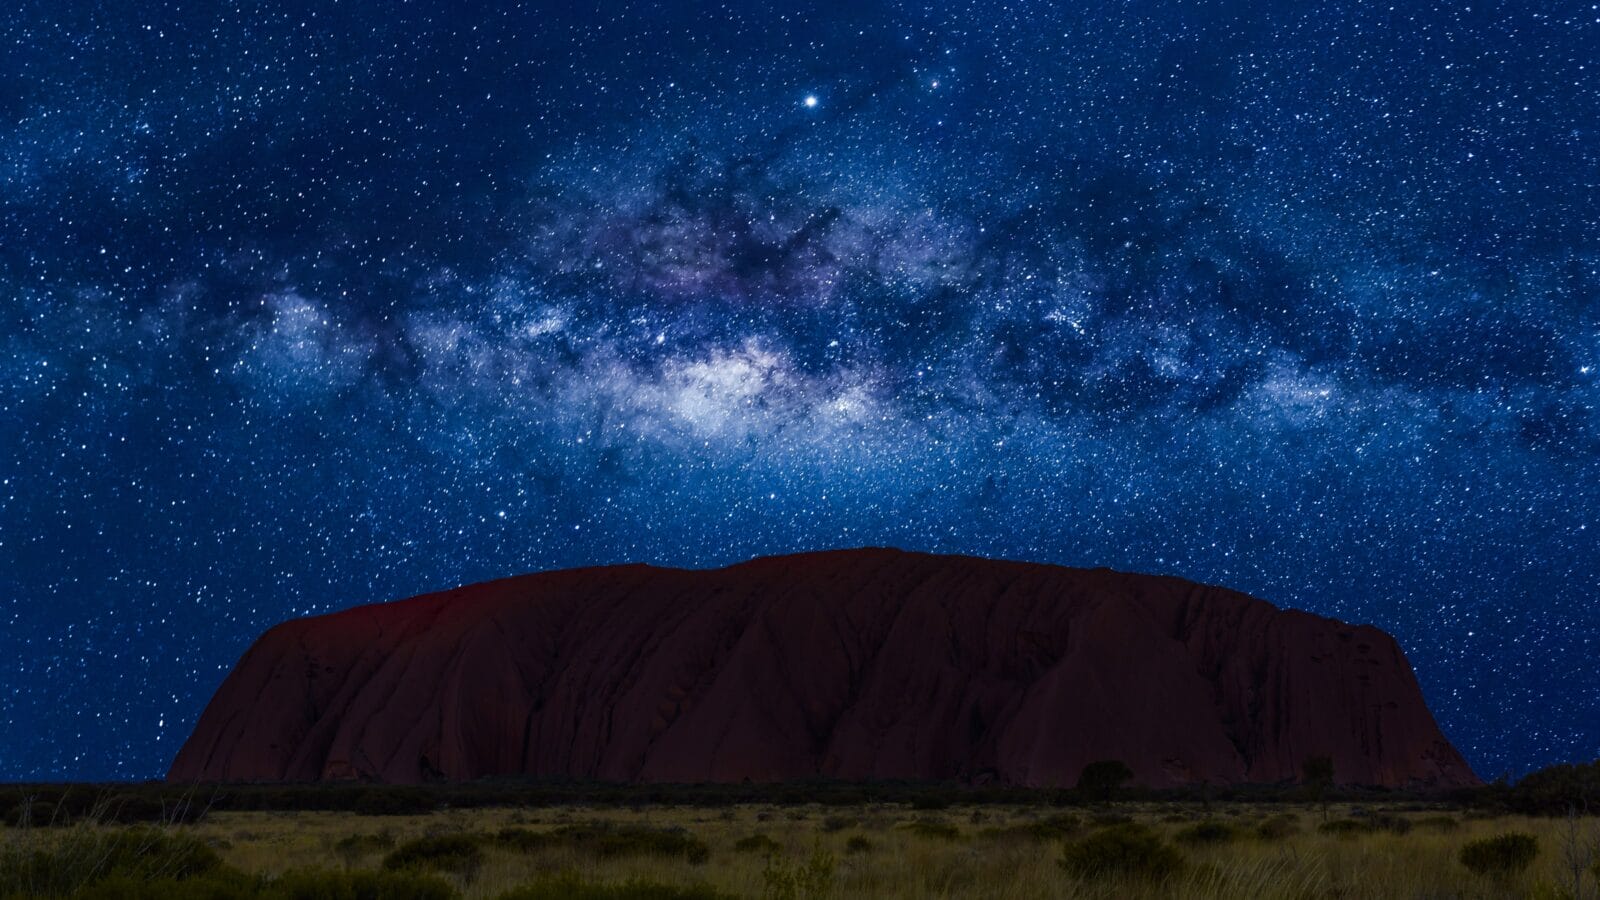 <p>Uluru Australia is home to quit a few exciting stargazing adventures. The Sounds of Silence tour is one of the best star viewing tours in the world and will take you on a trek through the iconic rock formations of Uluru which glow red at night. The dunes open up to a huge plateau where you can sit and dine on Aussie fare in the complete darkness while enjoying the otherworldly southern sky. With plenty of places to stay nearby, this is an easy stargazing destination to visit with your family. </p>